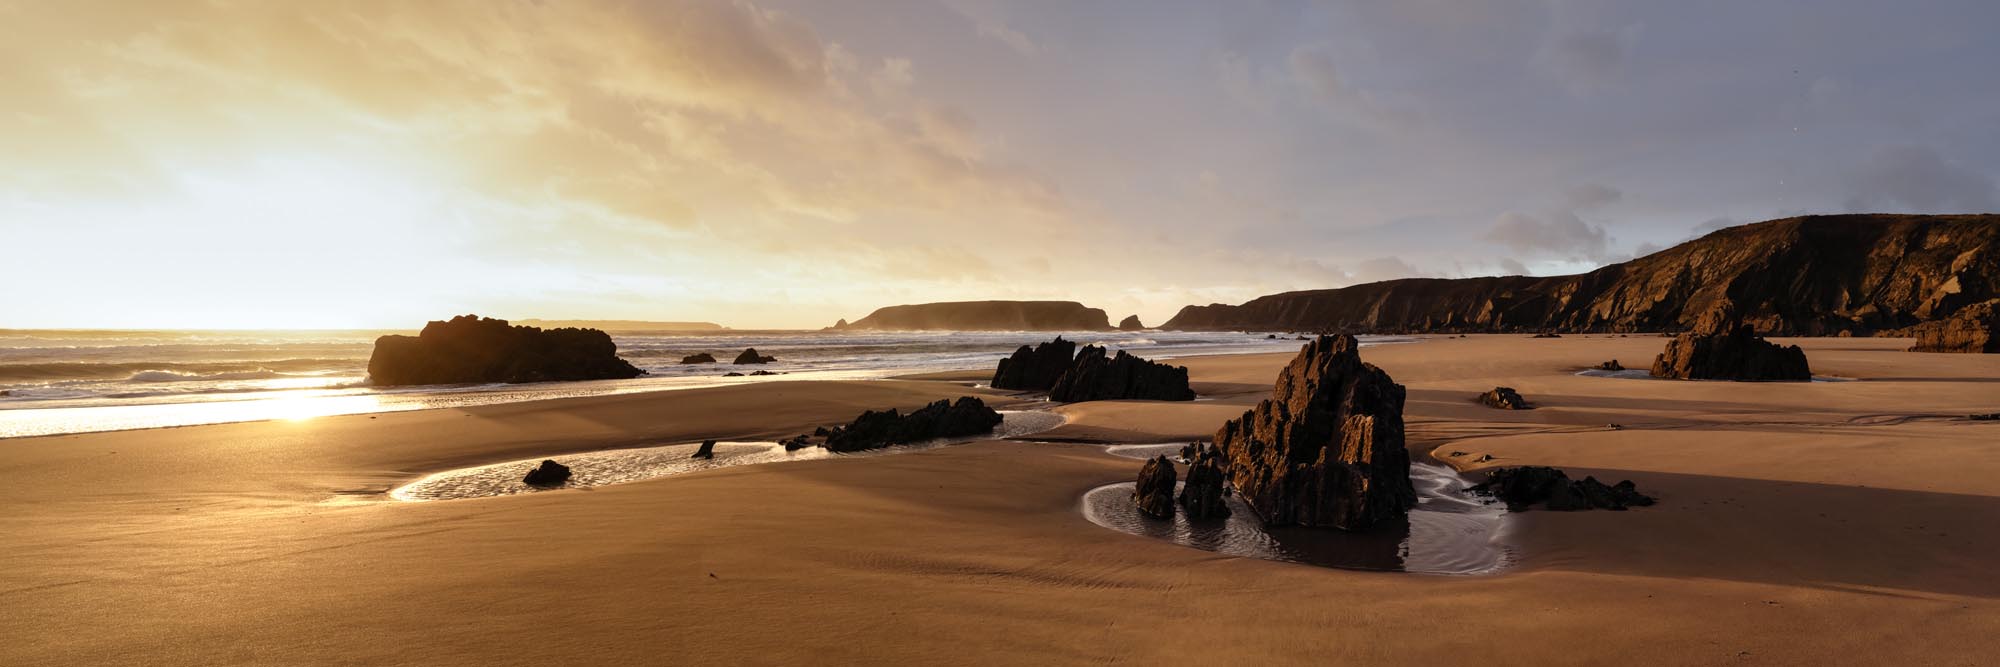 Panorama of Marloes sands beach at sunset on the Pembrokeshire Coast